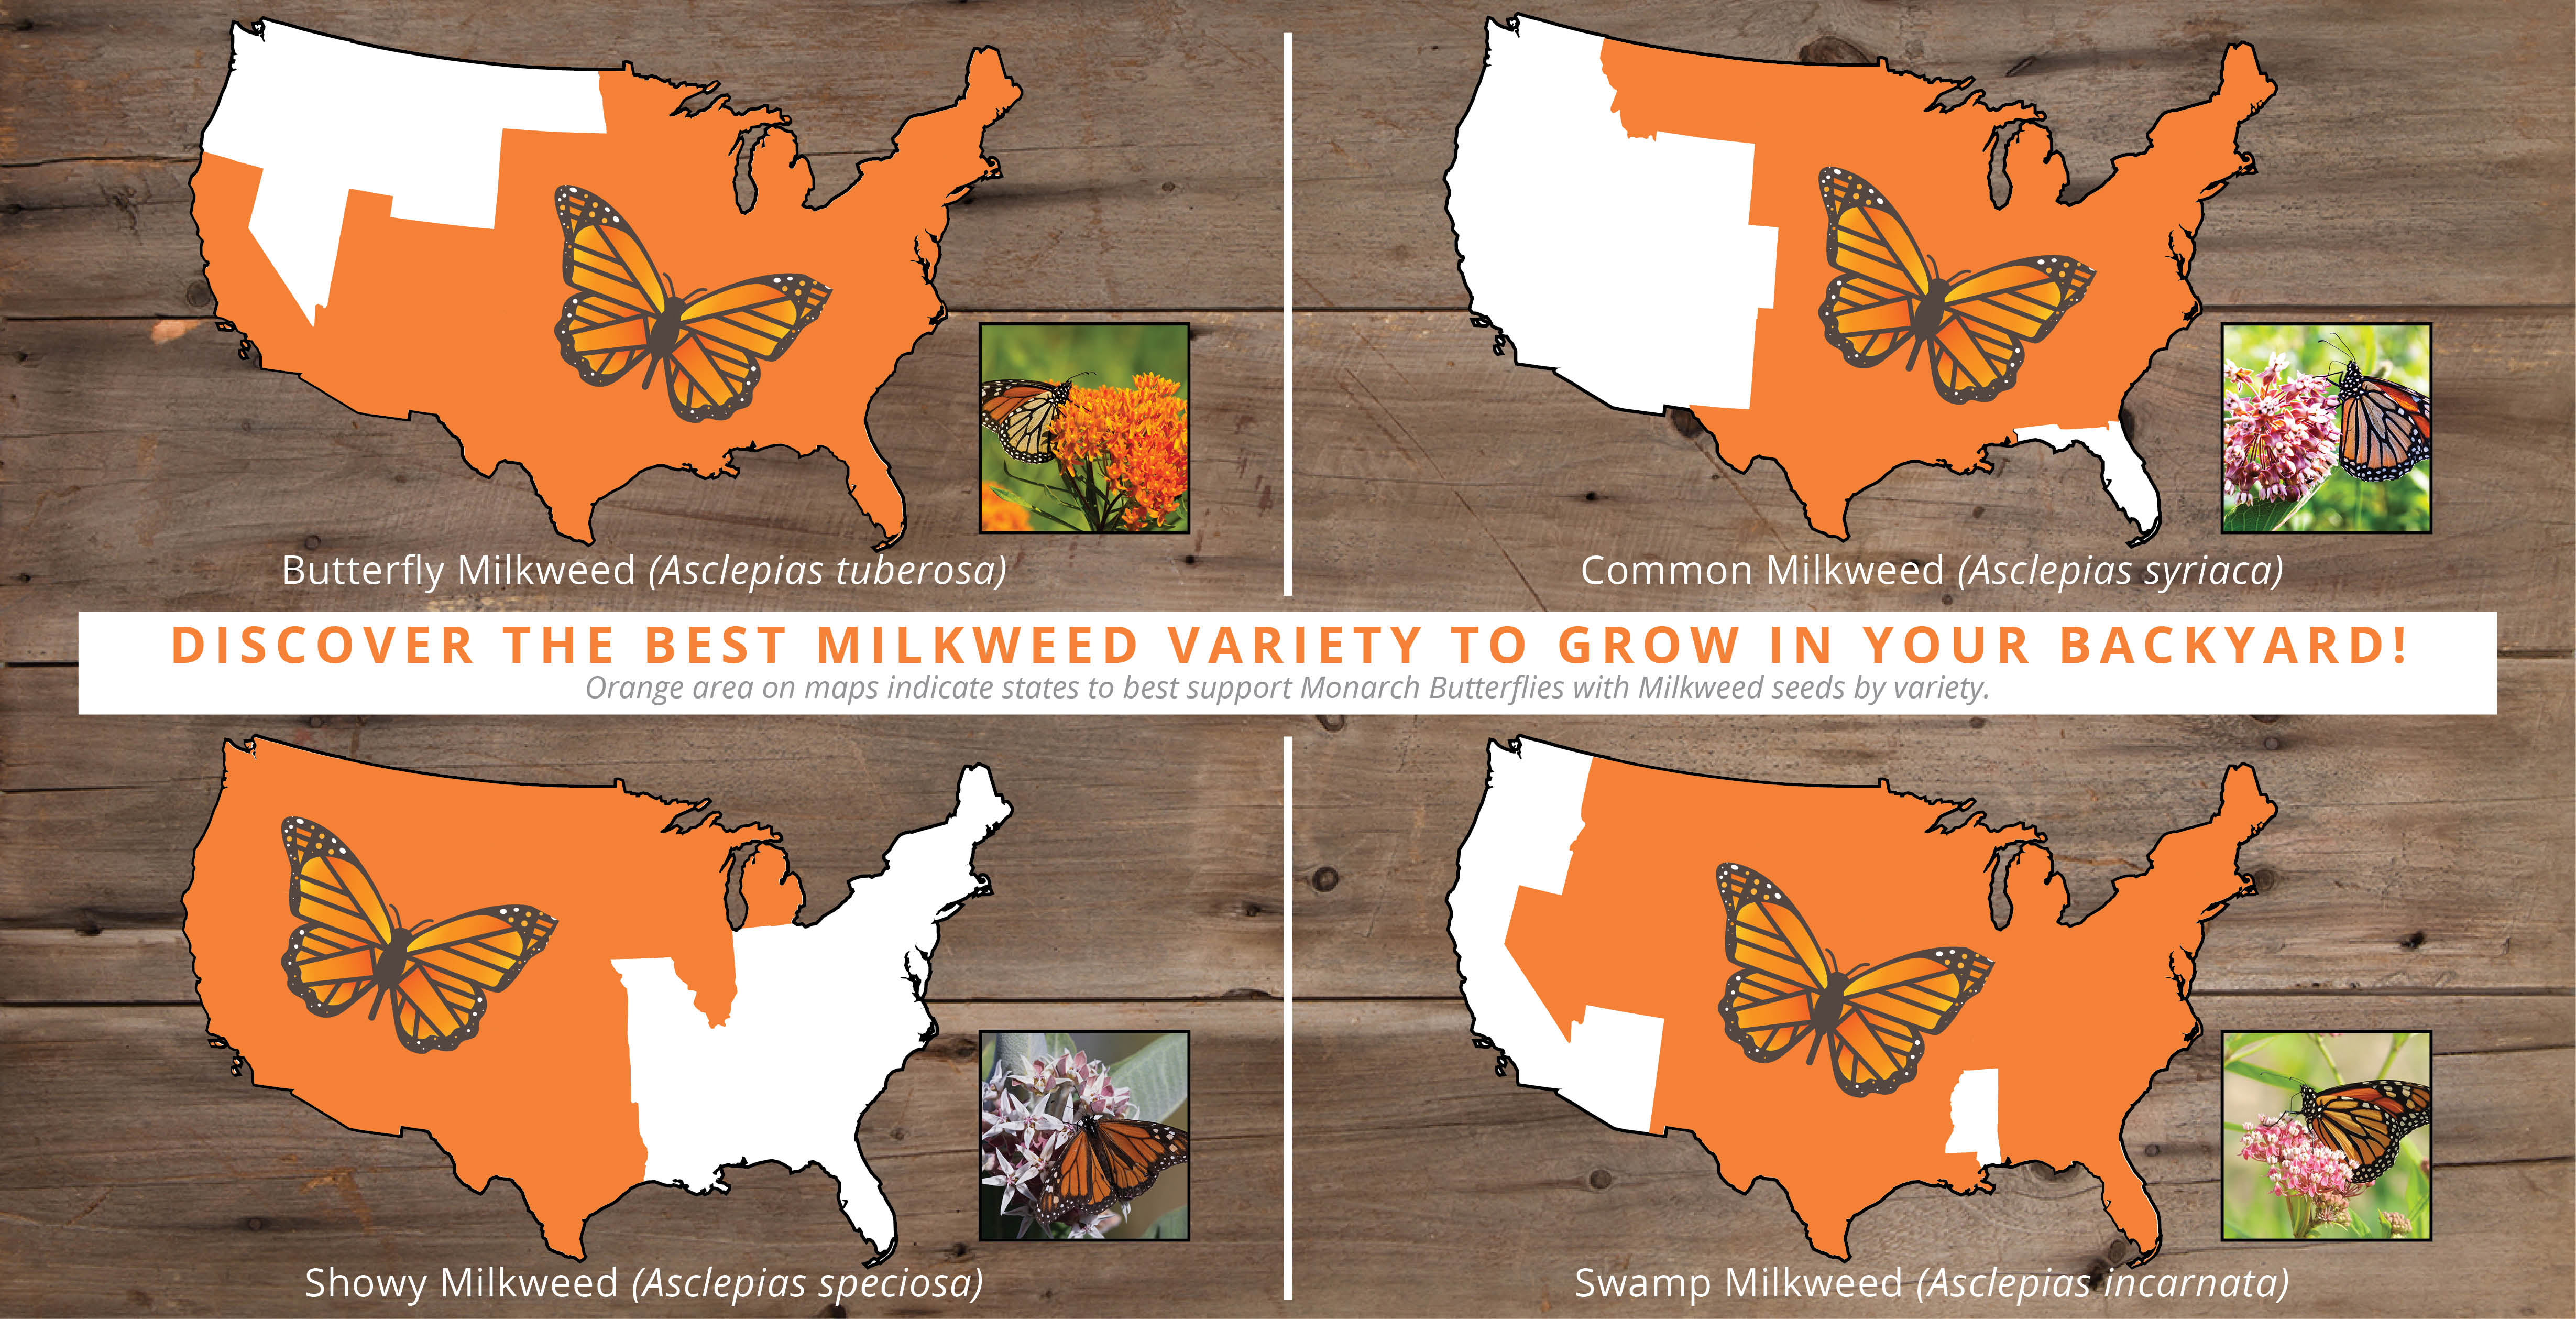 Discover the best Milkweed variety to grow in your backyard! Orange area on maps indicate states to best support Monarch Butterflies with Milkweed seeds by variety. Butterfly Milkweed (Asclepias tuberosa), Common Milkweed (Asclepias syriaca), Showy Milkweed (Asclepias speciosa), and Swamp Milkweed (Asclepias incarnata)